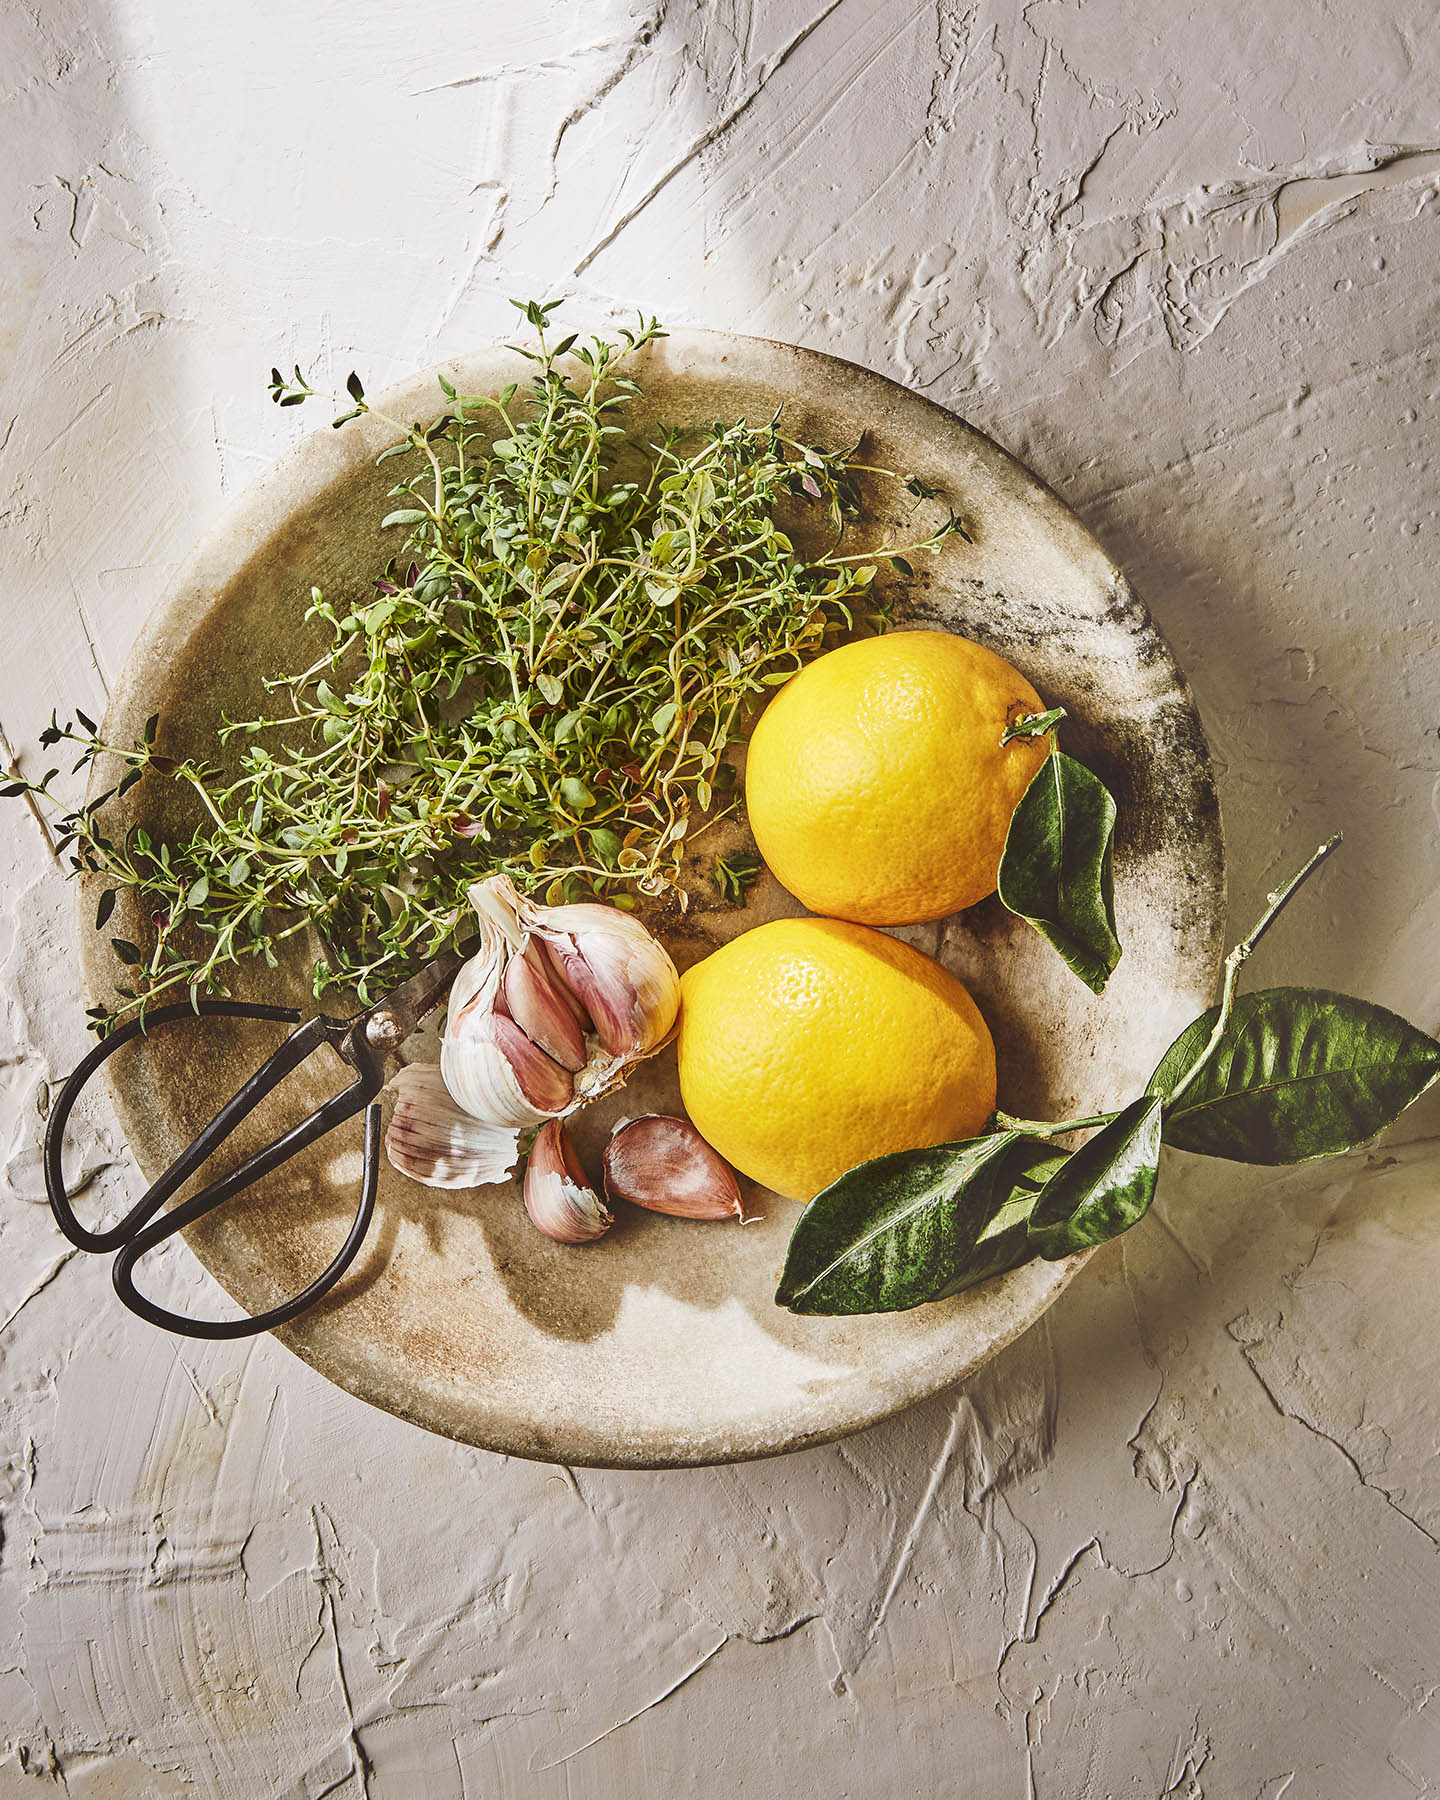 Lemon and Thyme Ingredients with Garlic